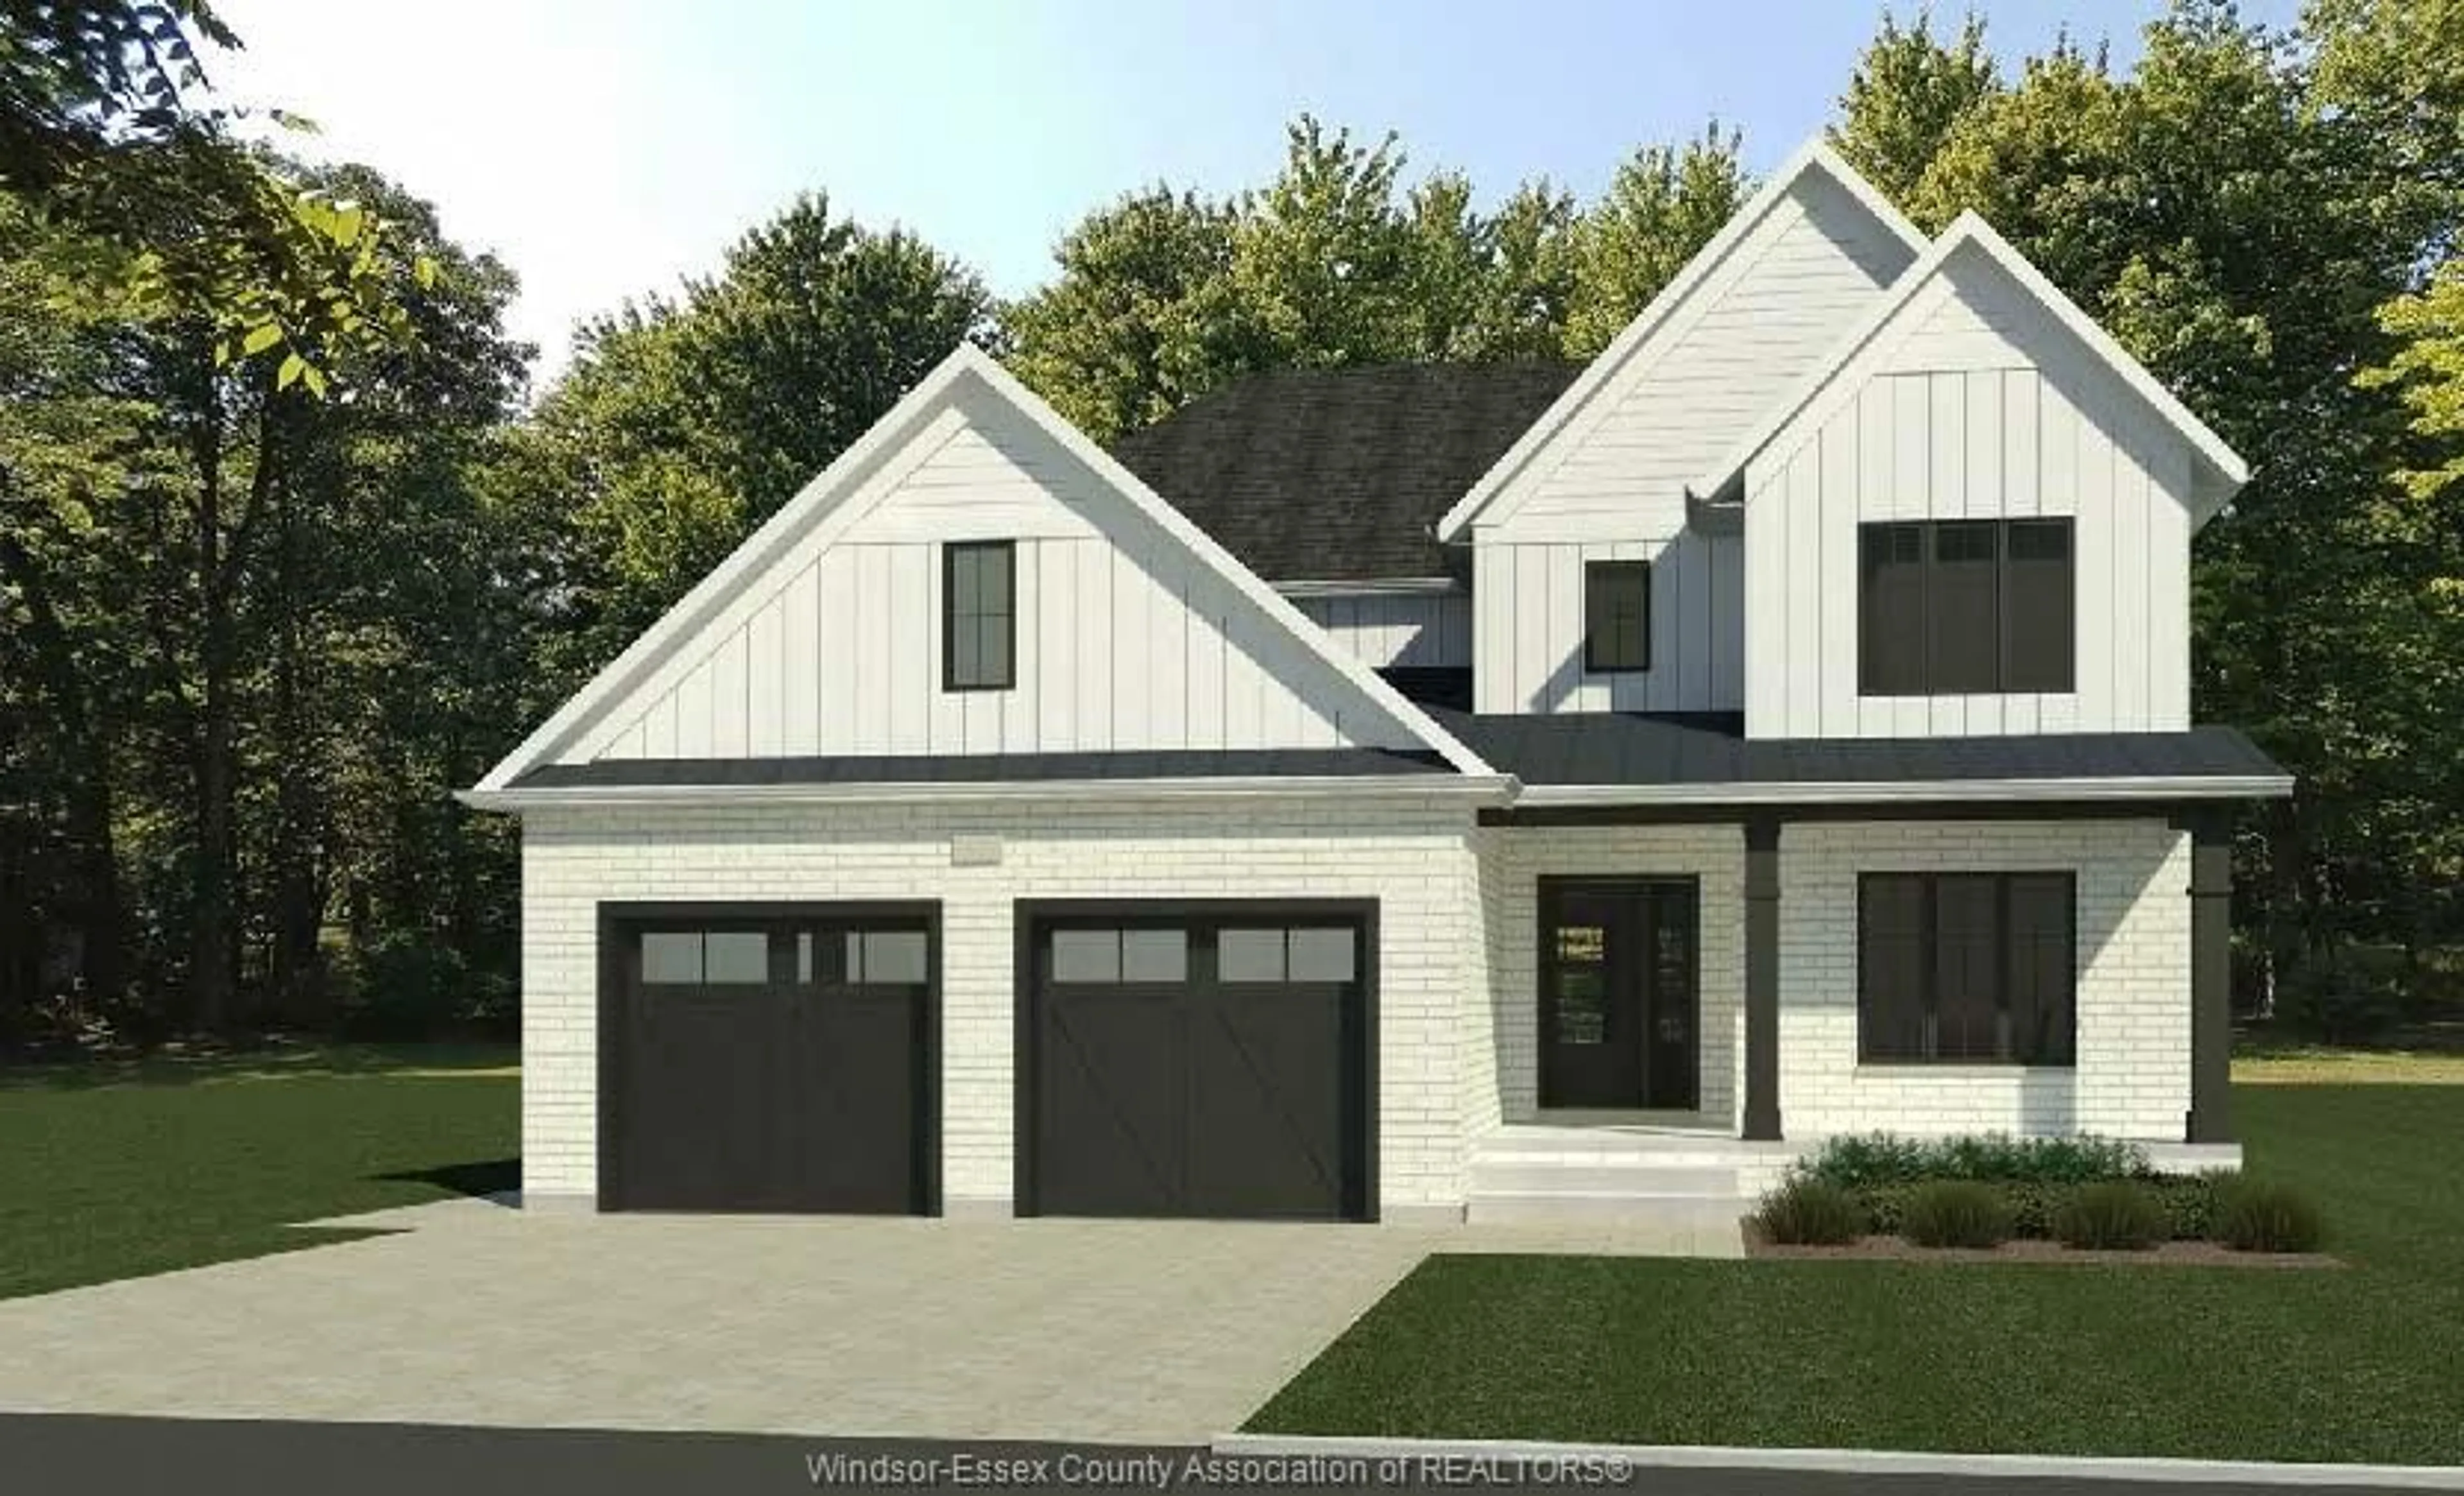 Home with brick exterior material for LOT 8 LASALLE WOODS, LaSalle Ontario N8N 1M2